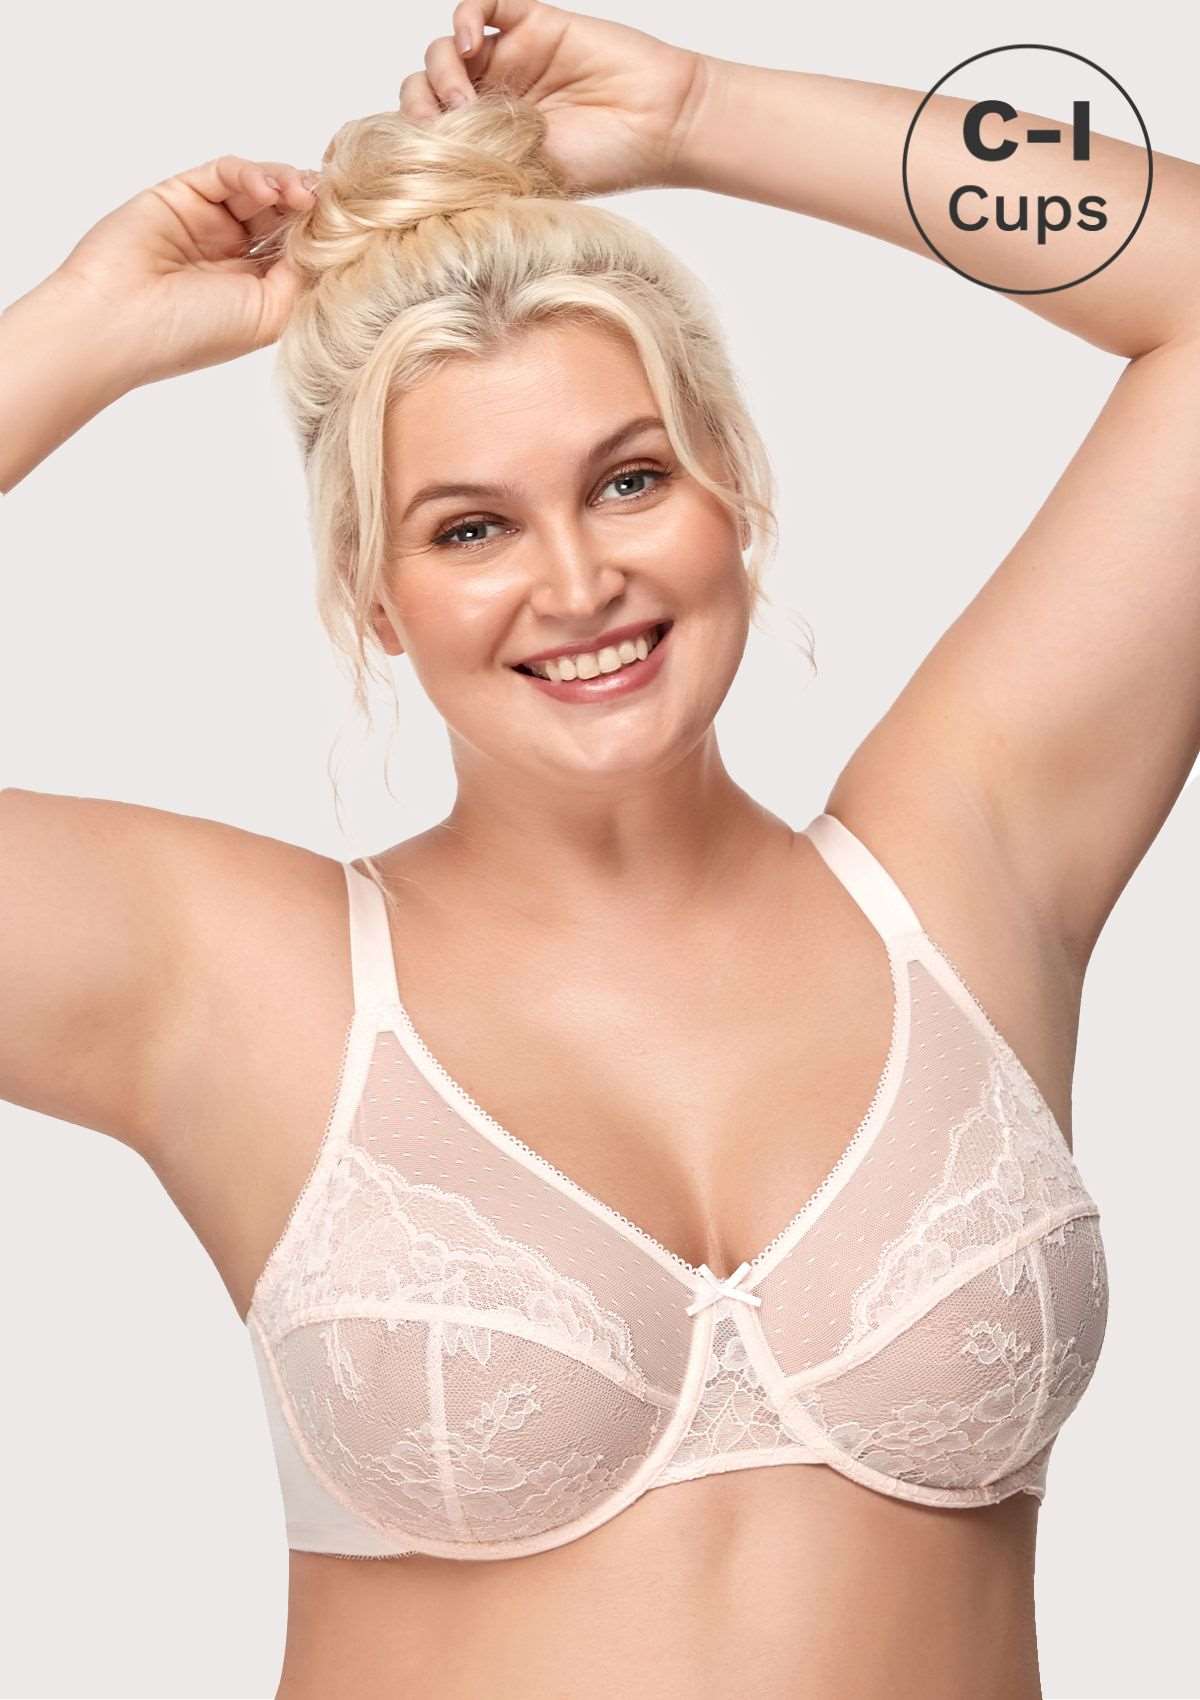 HSIA Enchante Lacy Bra: Comfy Sheer Lace Bra With Lift - Pink / 34 / C